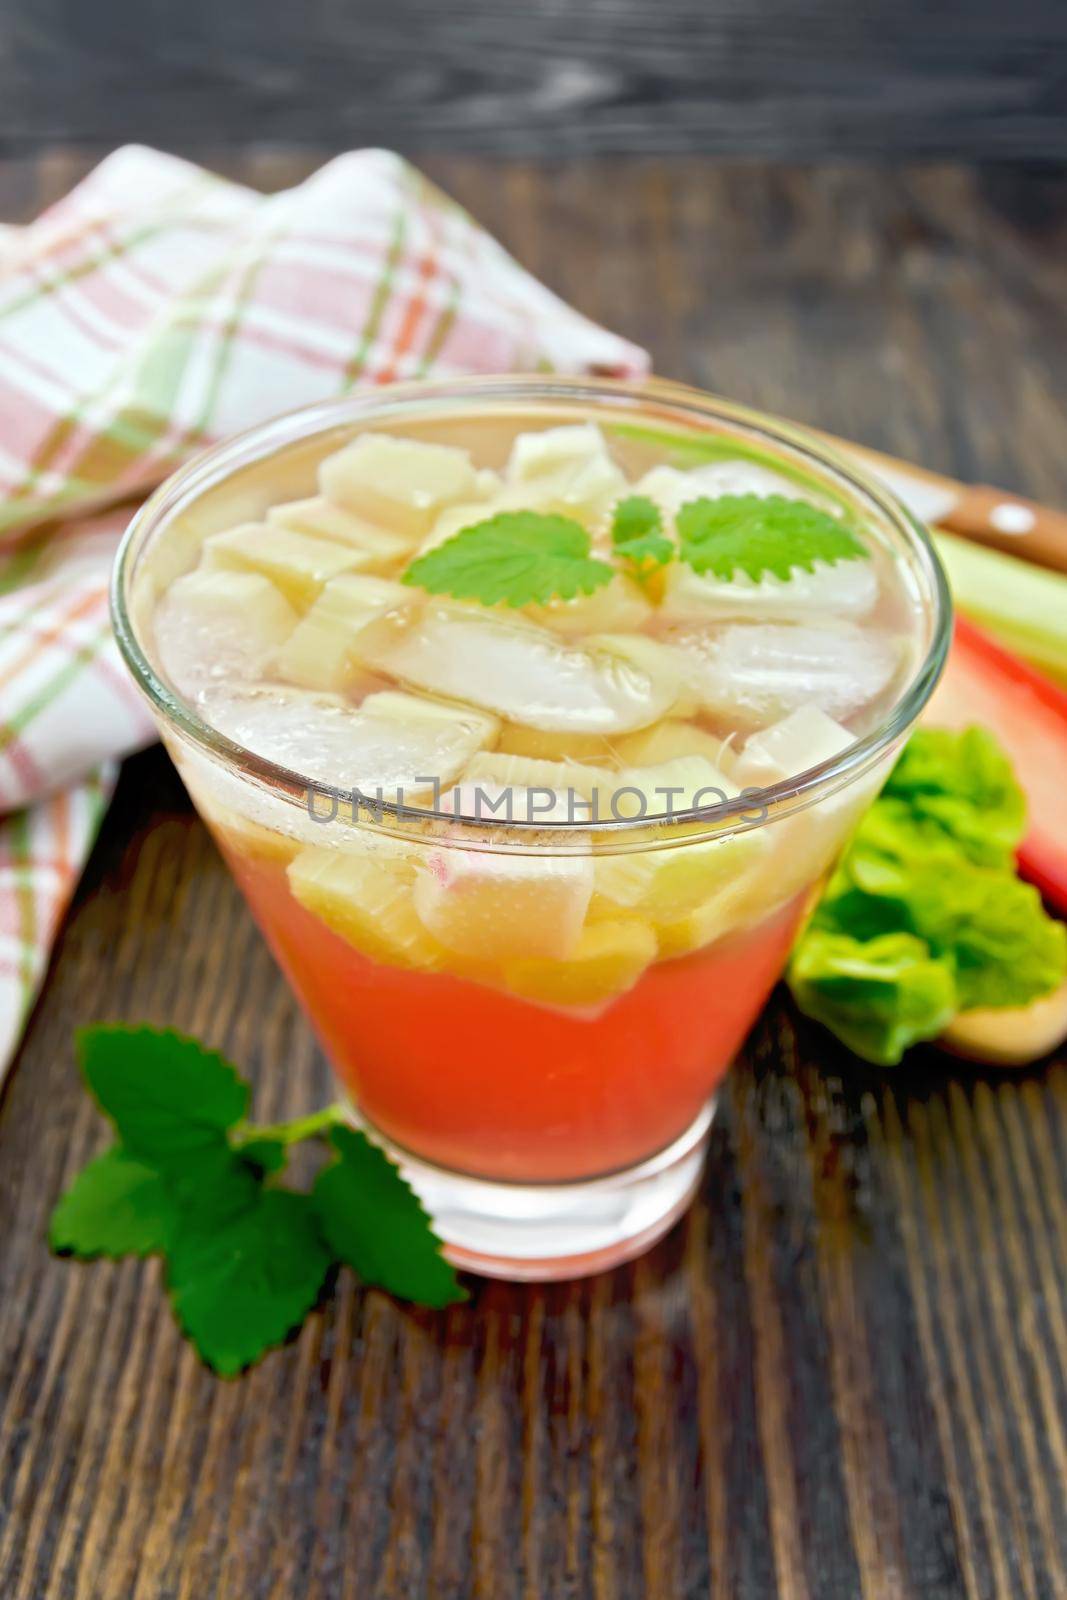 Lemonade with rhubarb and mint in a glass, stems and a leaf of a vegetable, napkin on a background of a dark wooden board